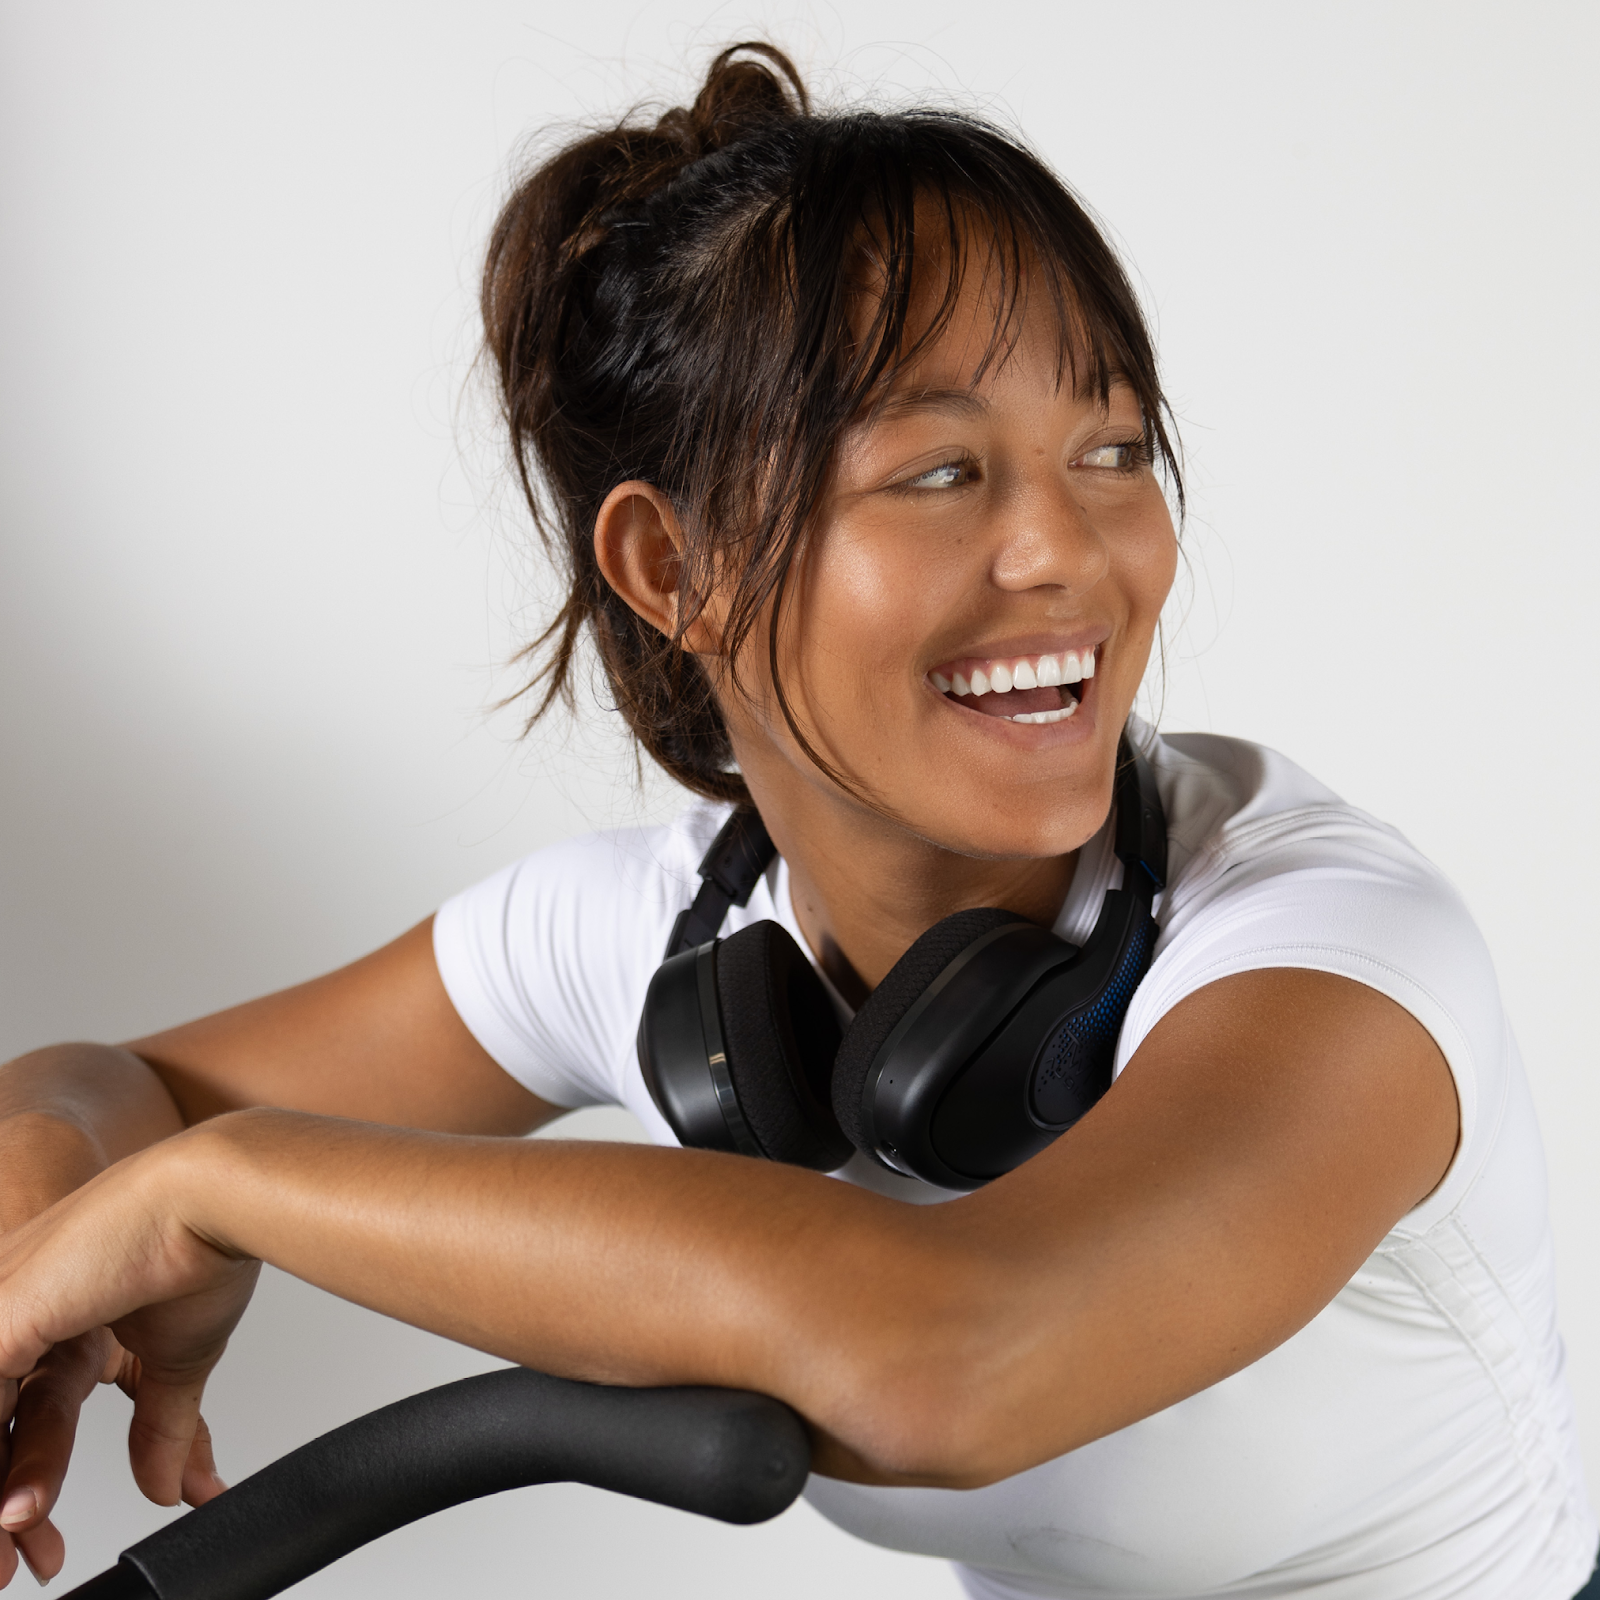 A woman, with a smile directed towards someone on her left, casually rests her TW340 headphones from TWT Audio around her neck while seated on a stationary bike, enjoying her workout.